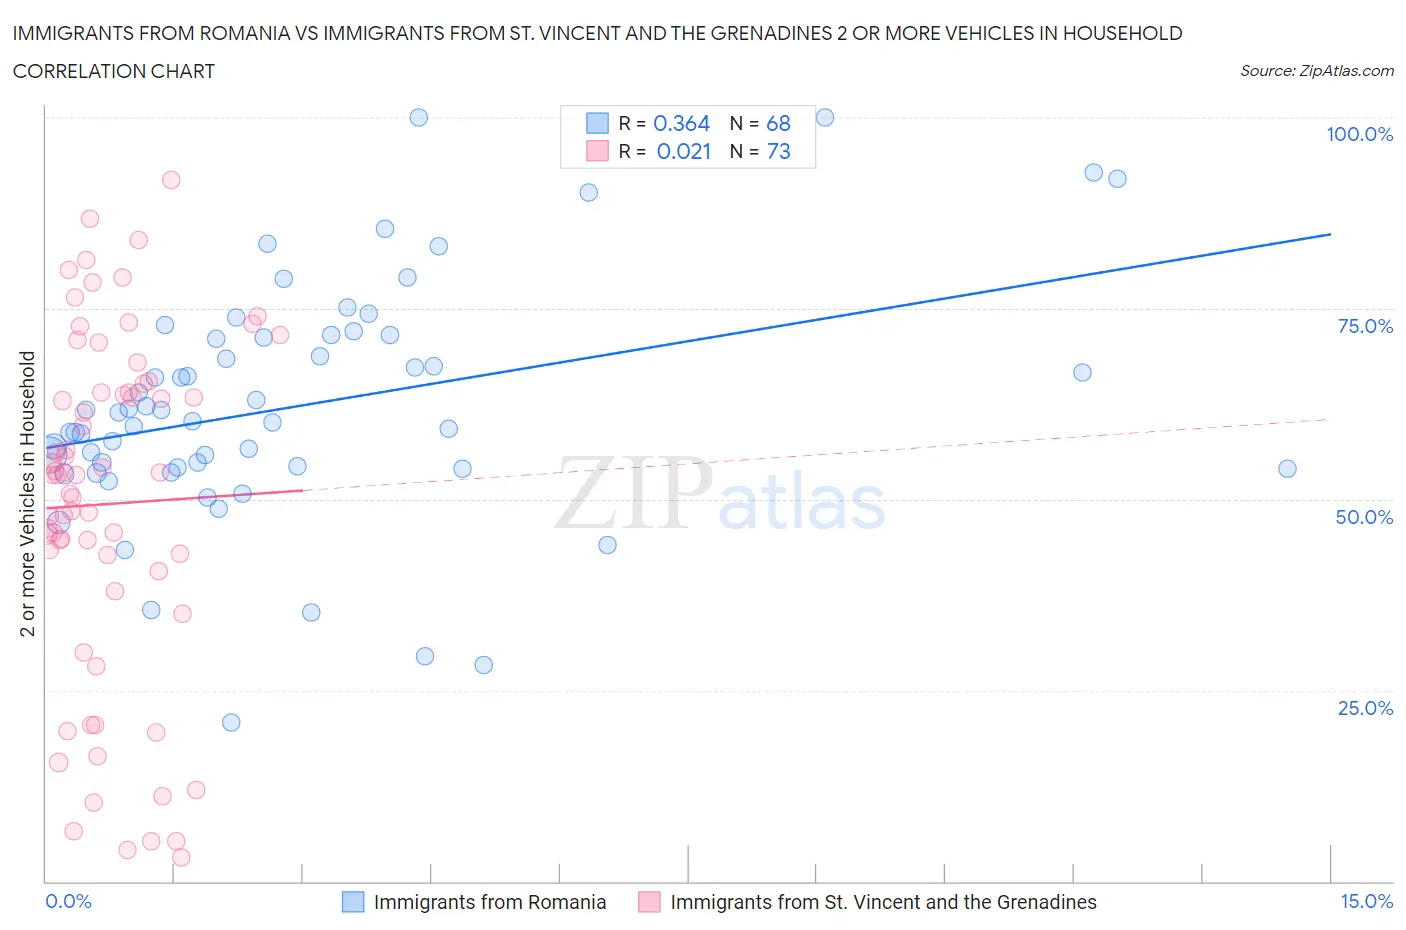 Immigrants from Romania vs Immigrants from St. Vincent and the Grenadines 2 or more Vehicles in Household